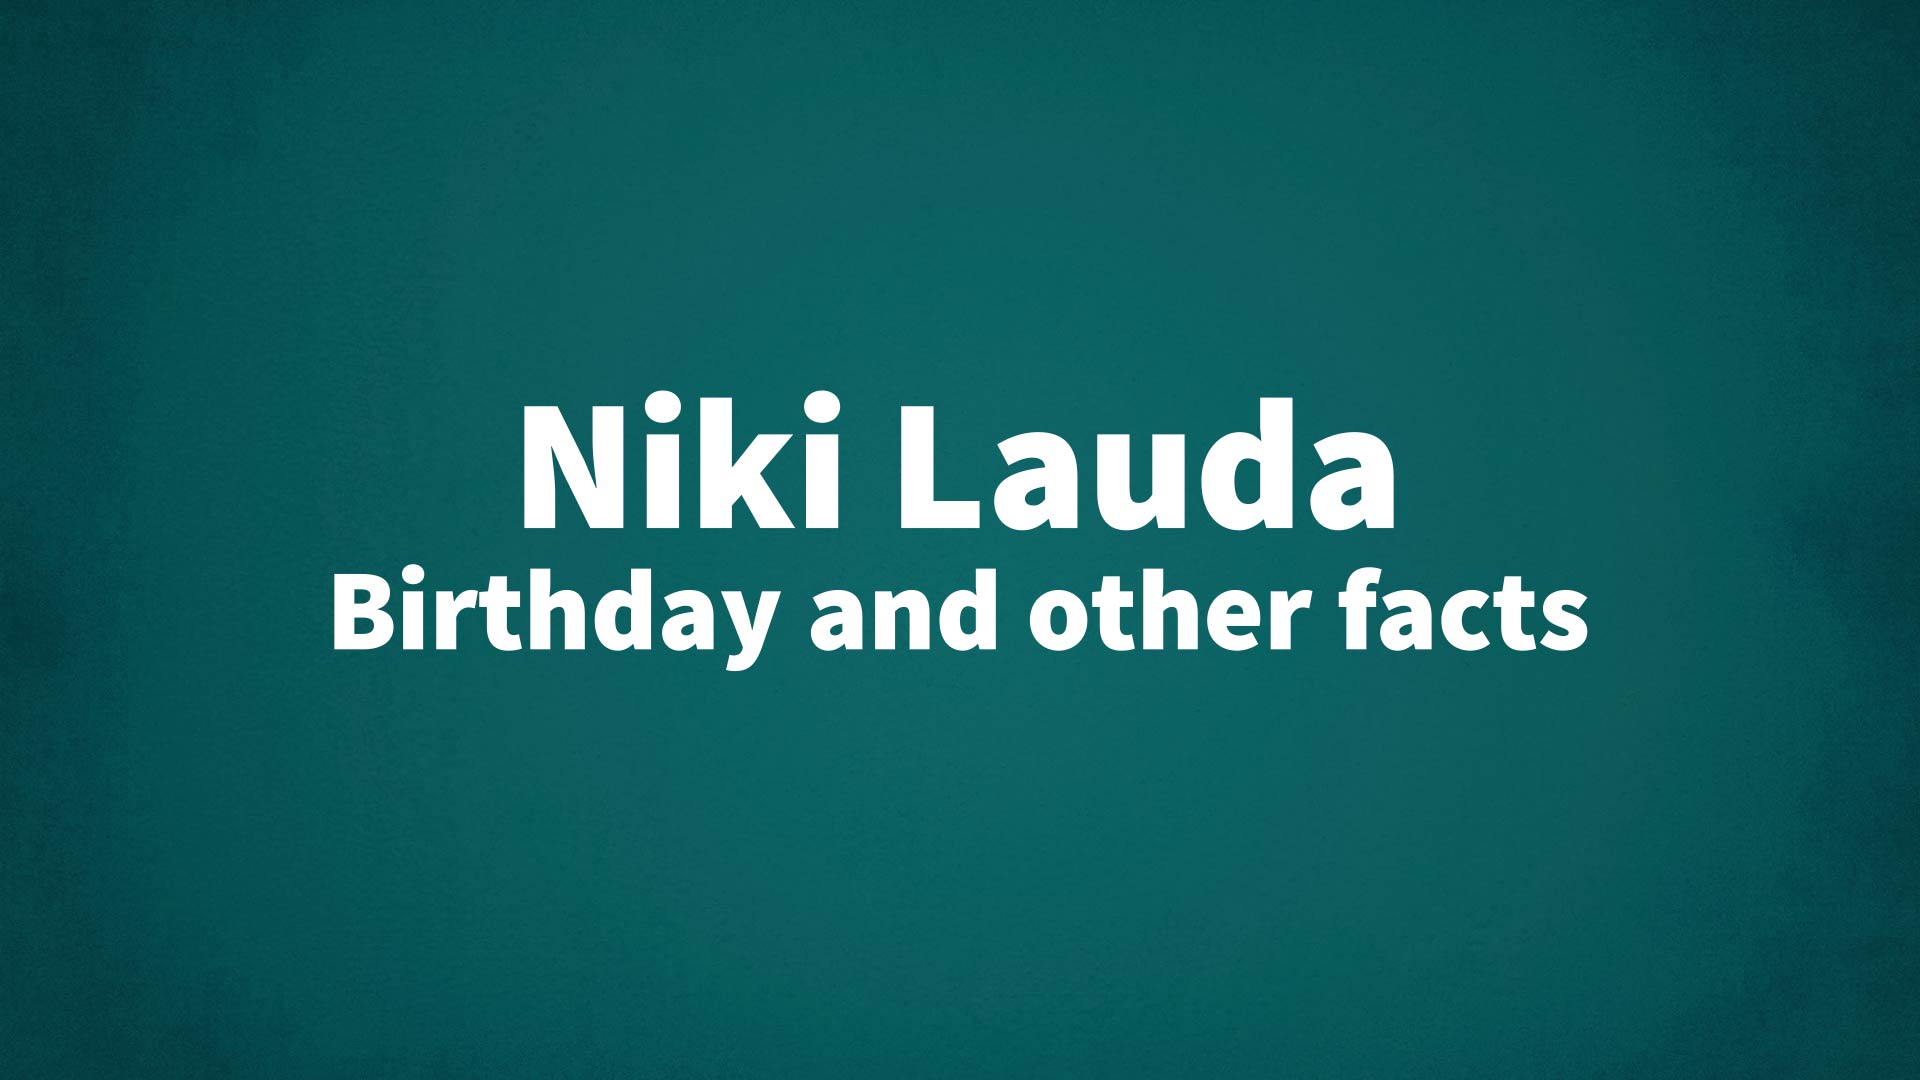 Niki Lauda - Birthday and other facts